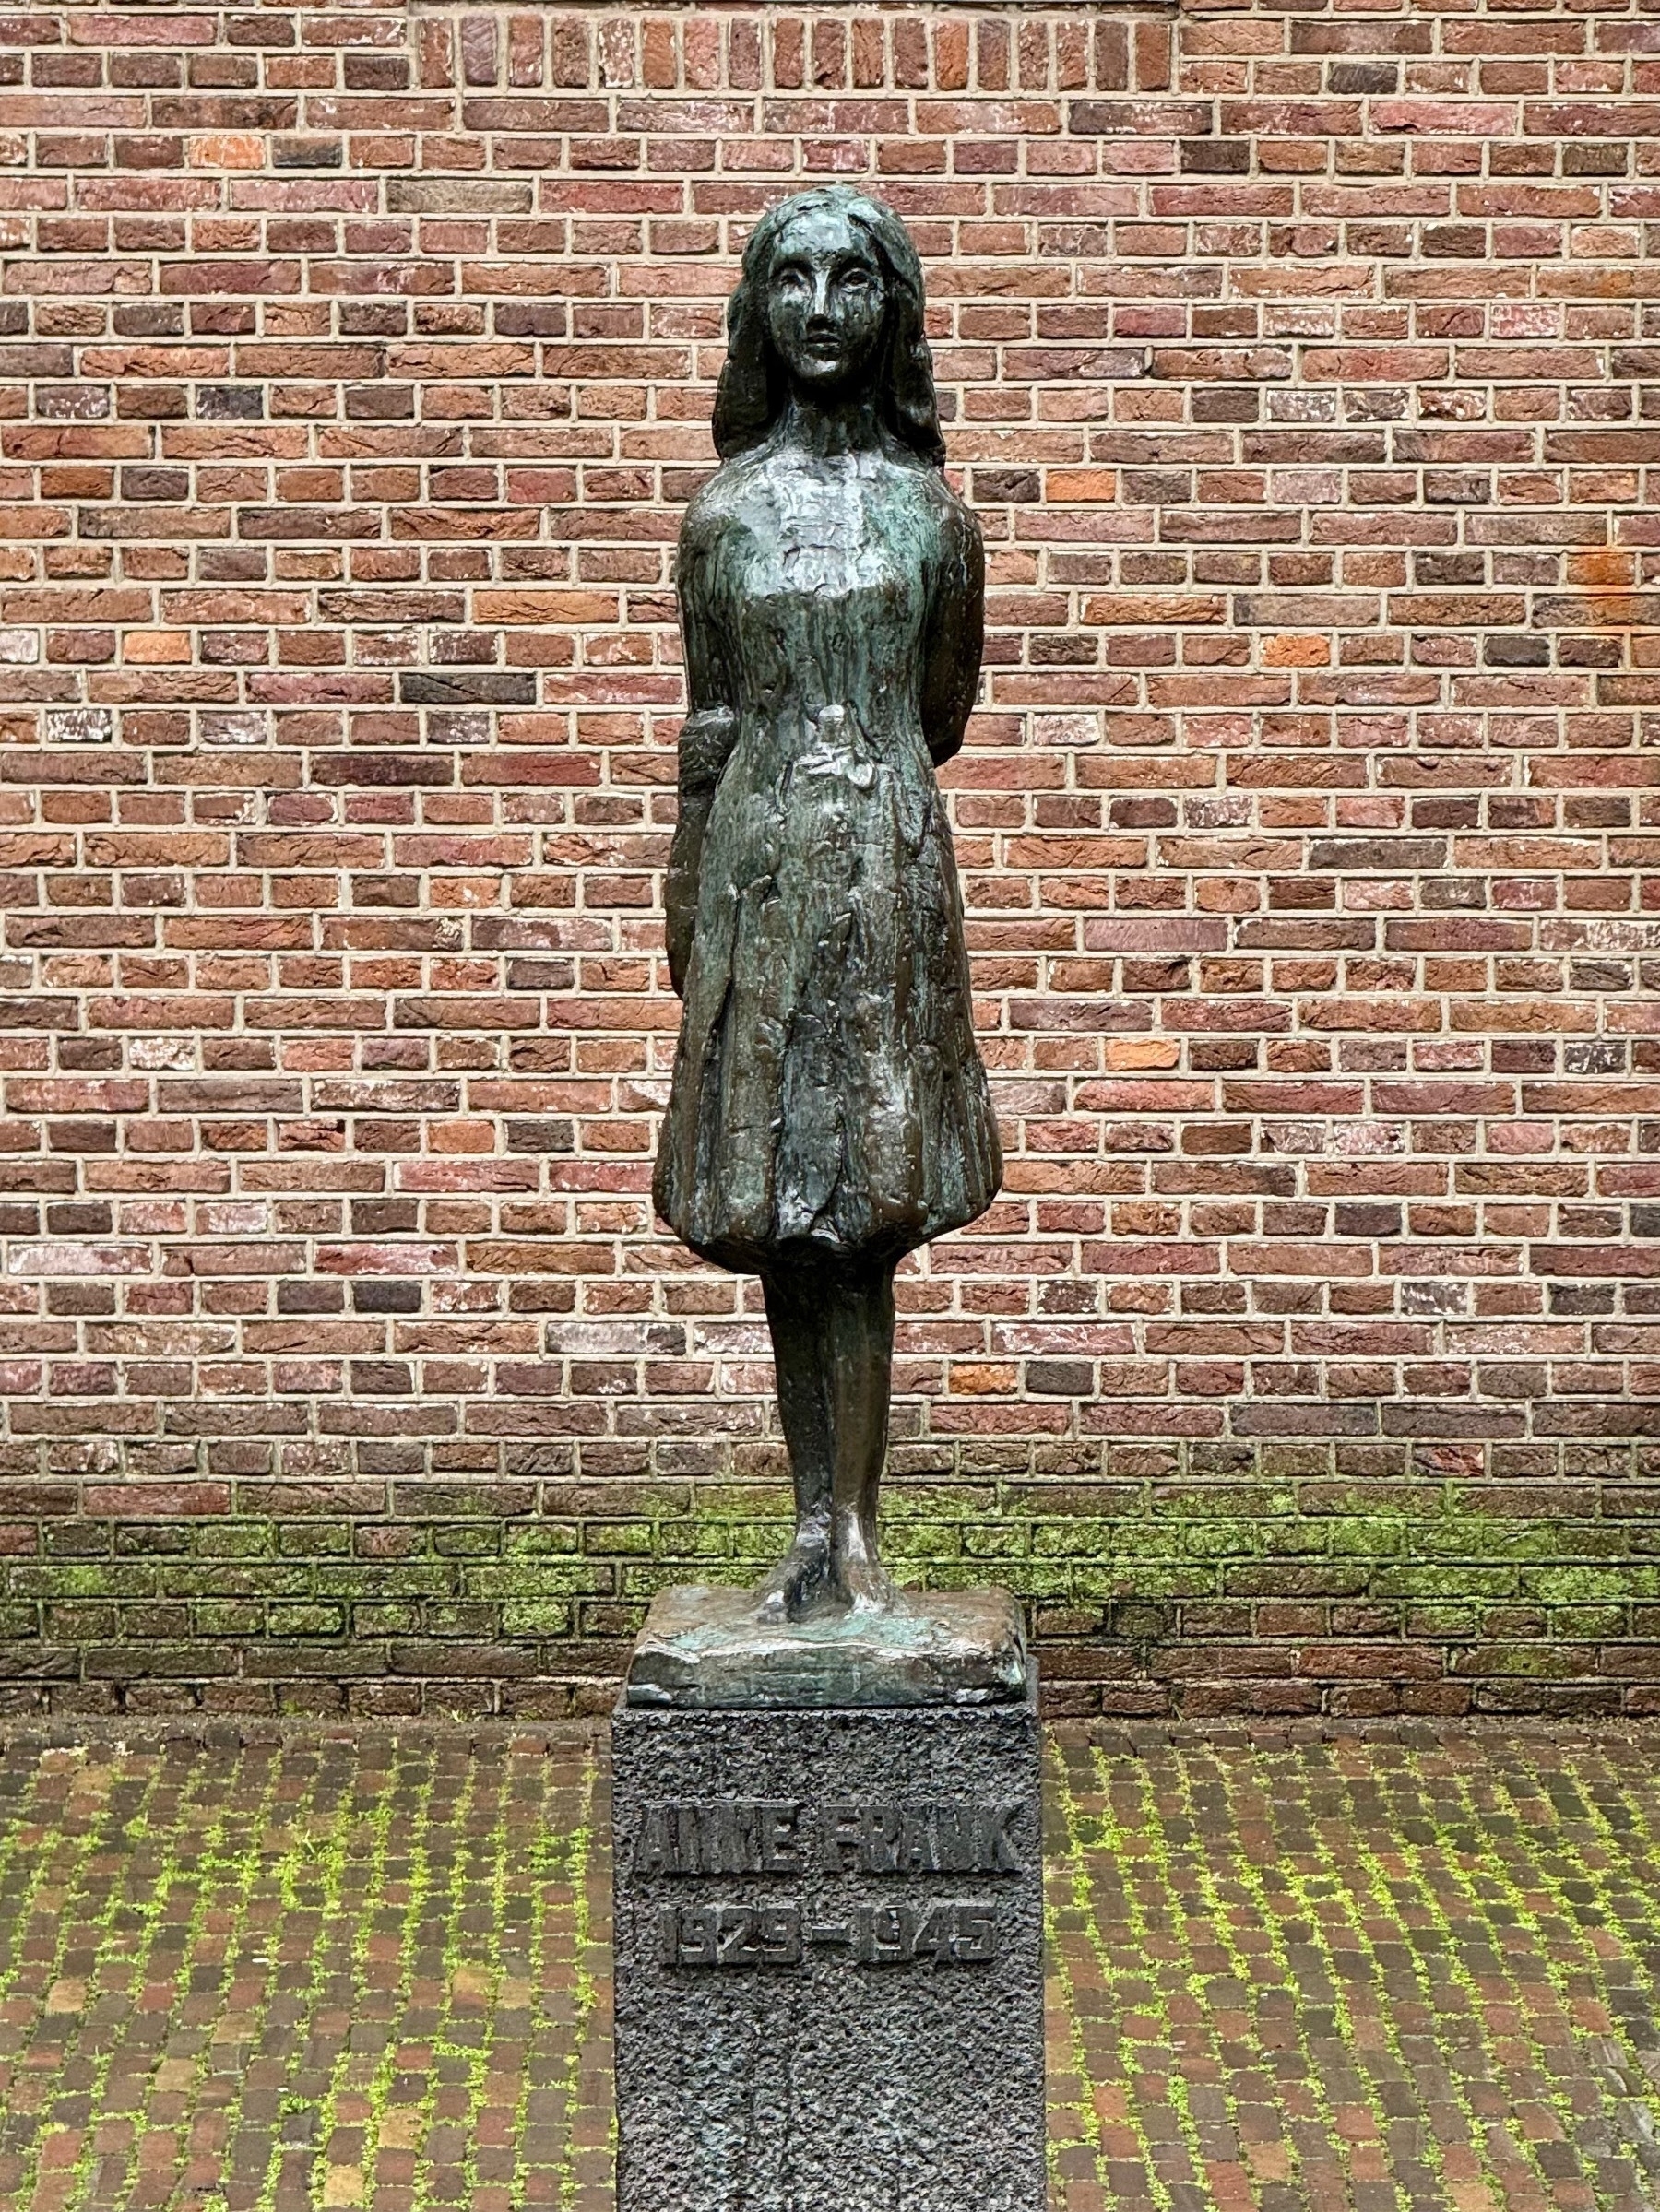 Statue of Anne Frank, 1929-1945